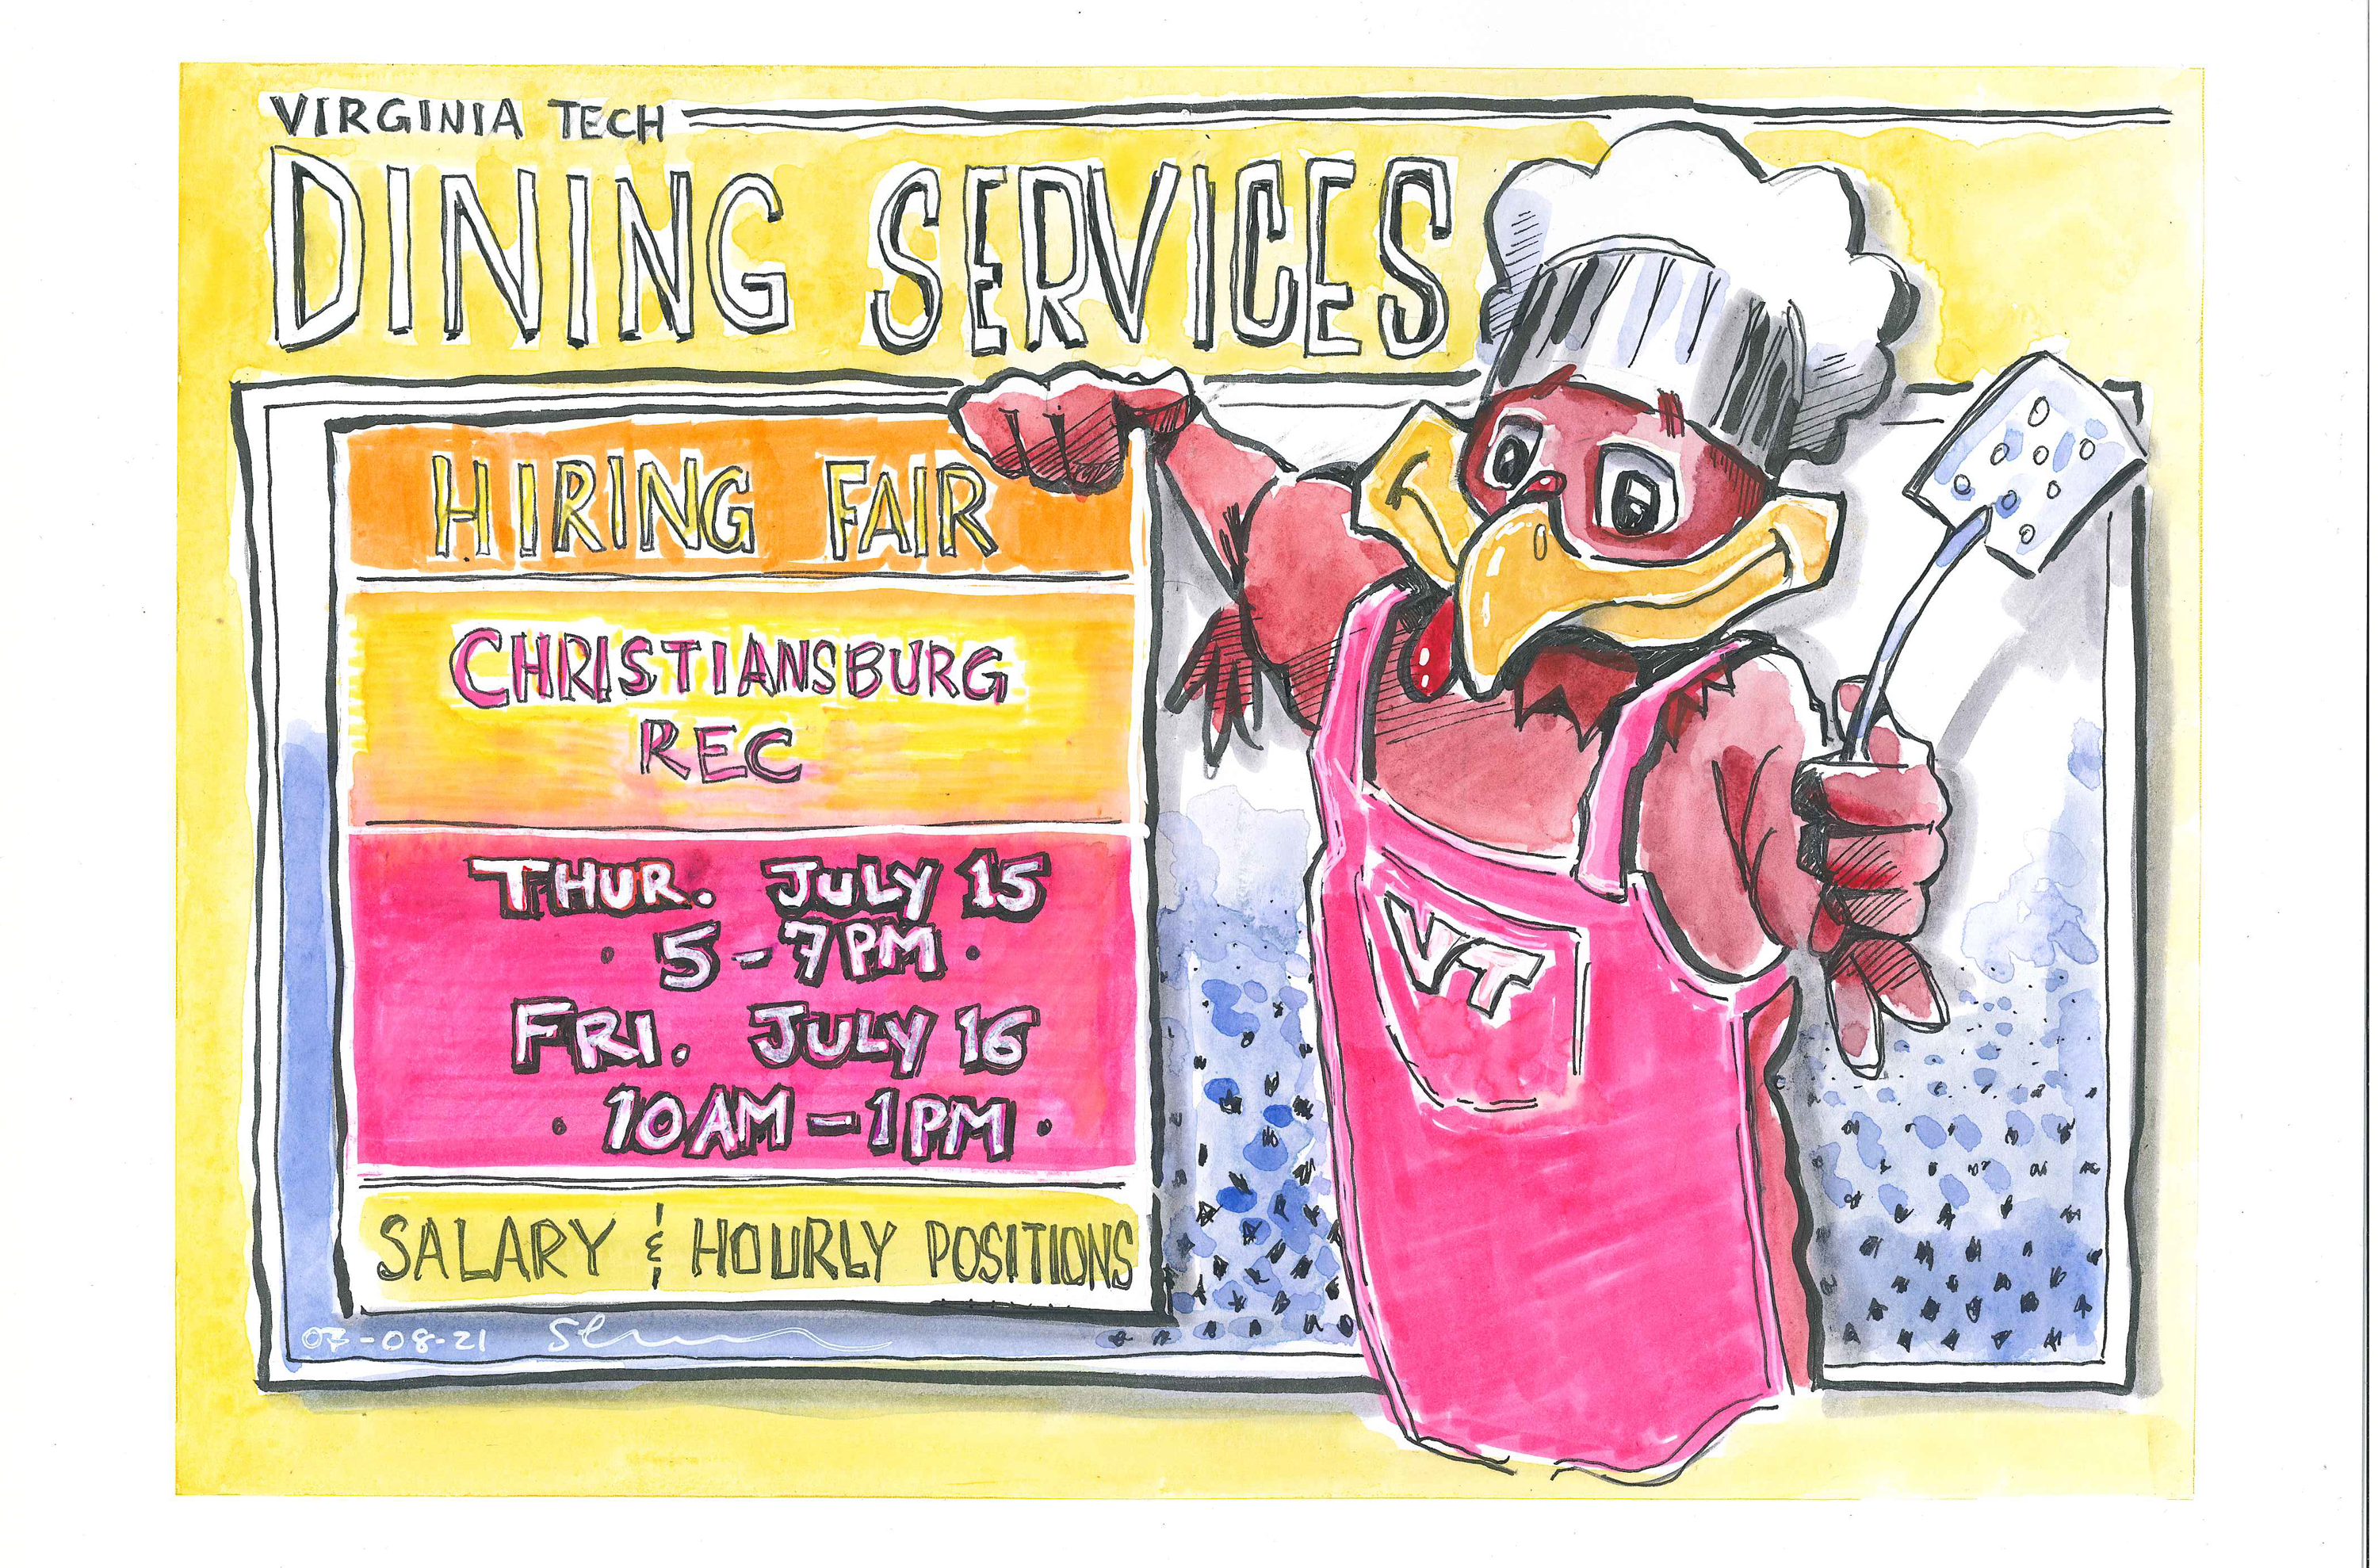 Ink and watercolor sketch of Dining Services Hiring Fair Info